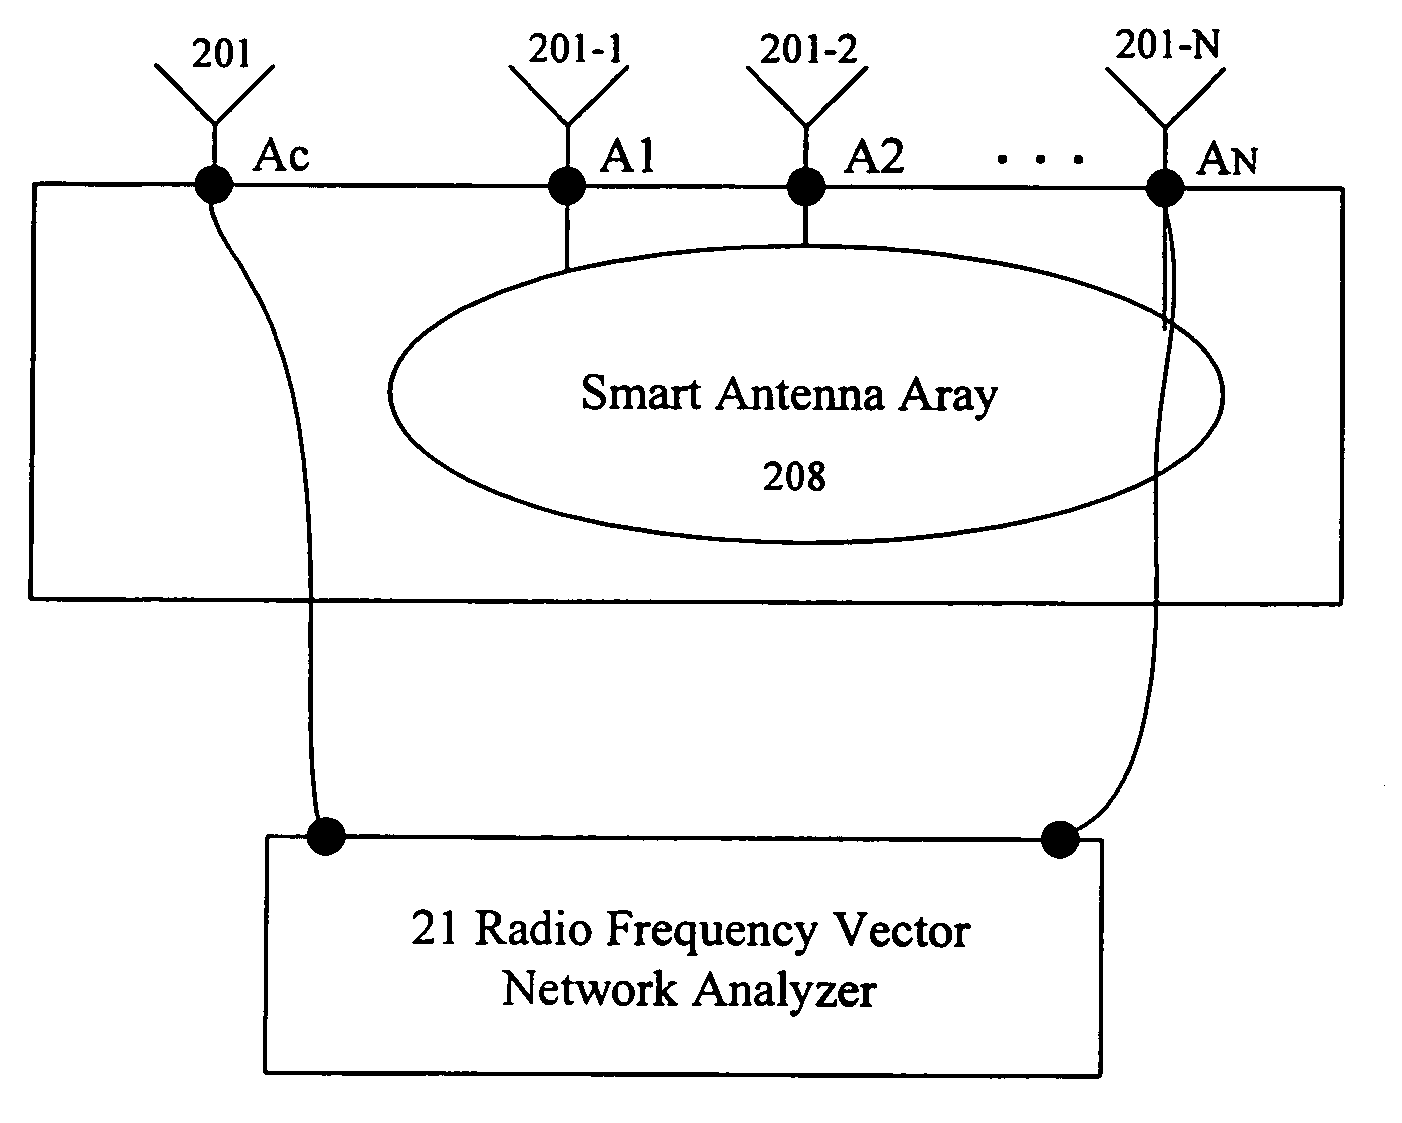 Method for calibrating smart antenna array systems in real time